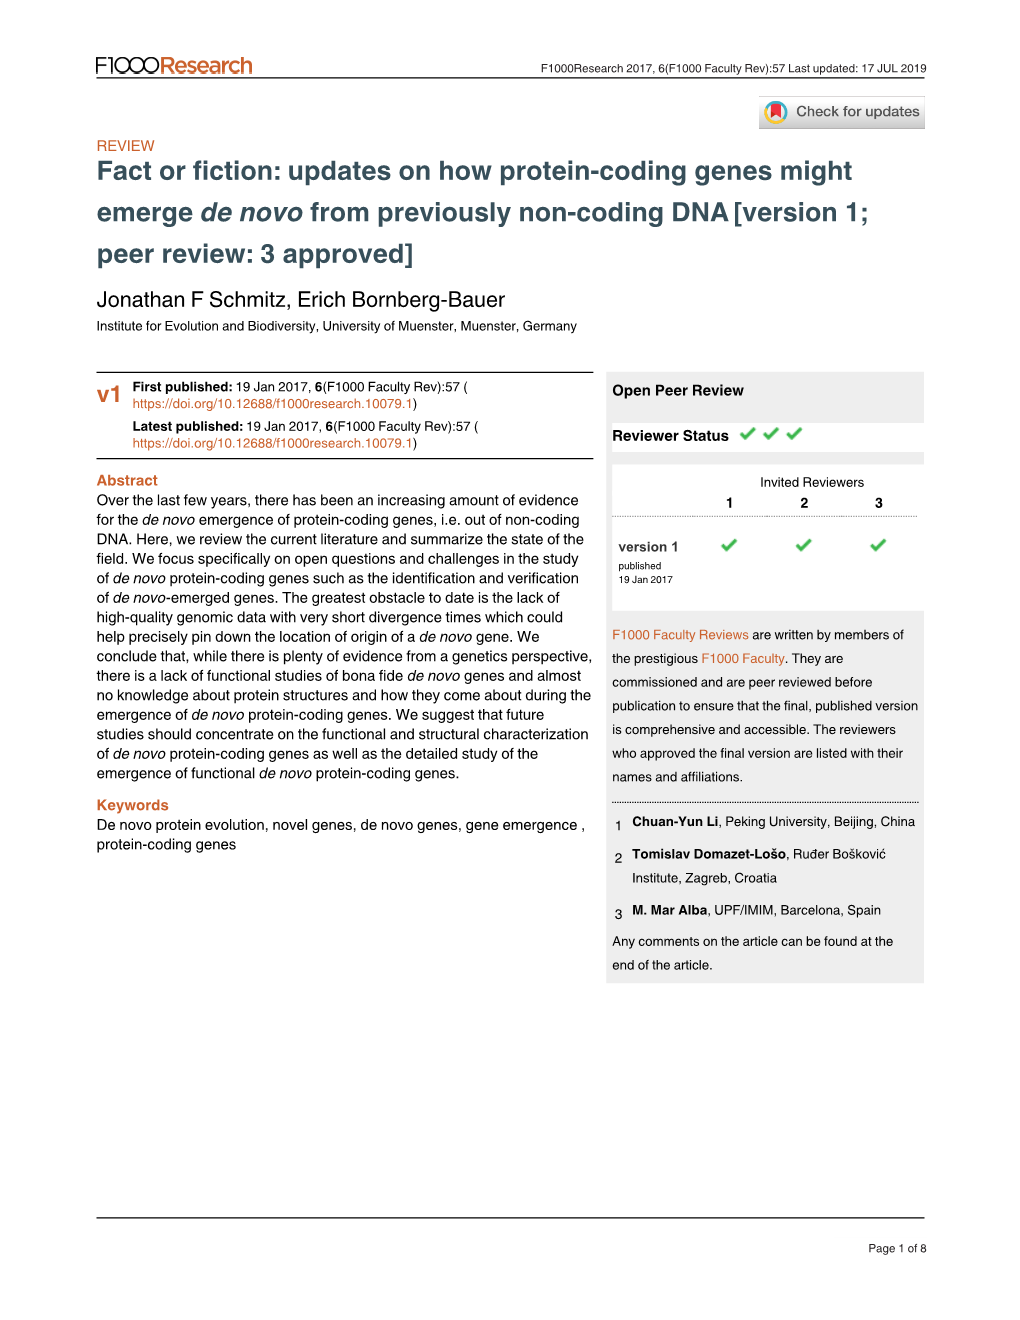 Updates on How Protein-Coding Genes Might Emerge from Previously Non-Coding DNA De Novo